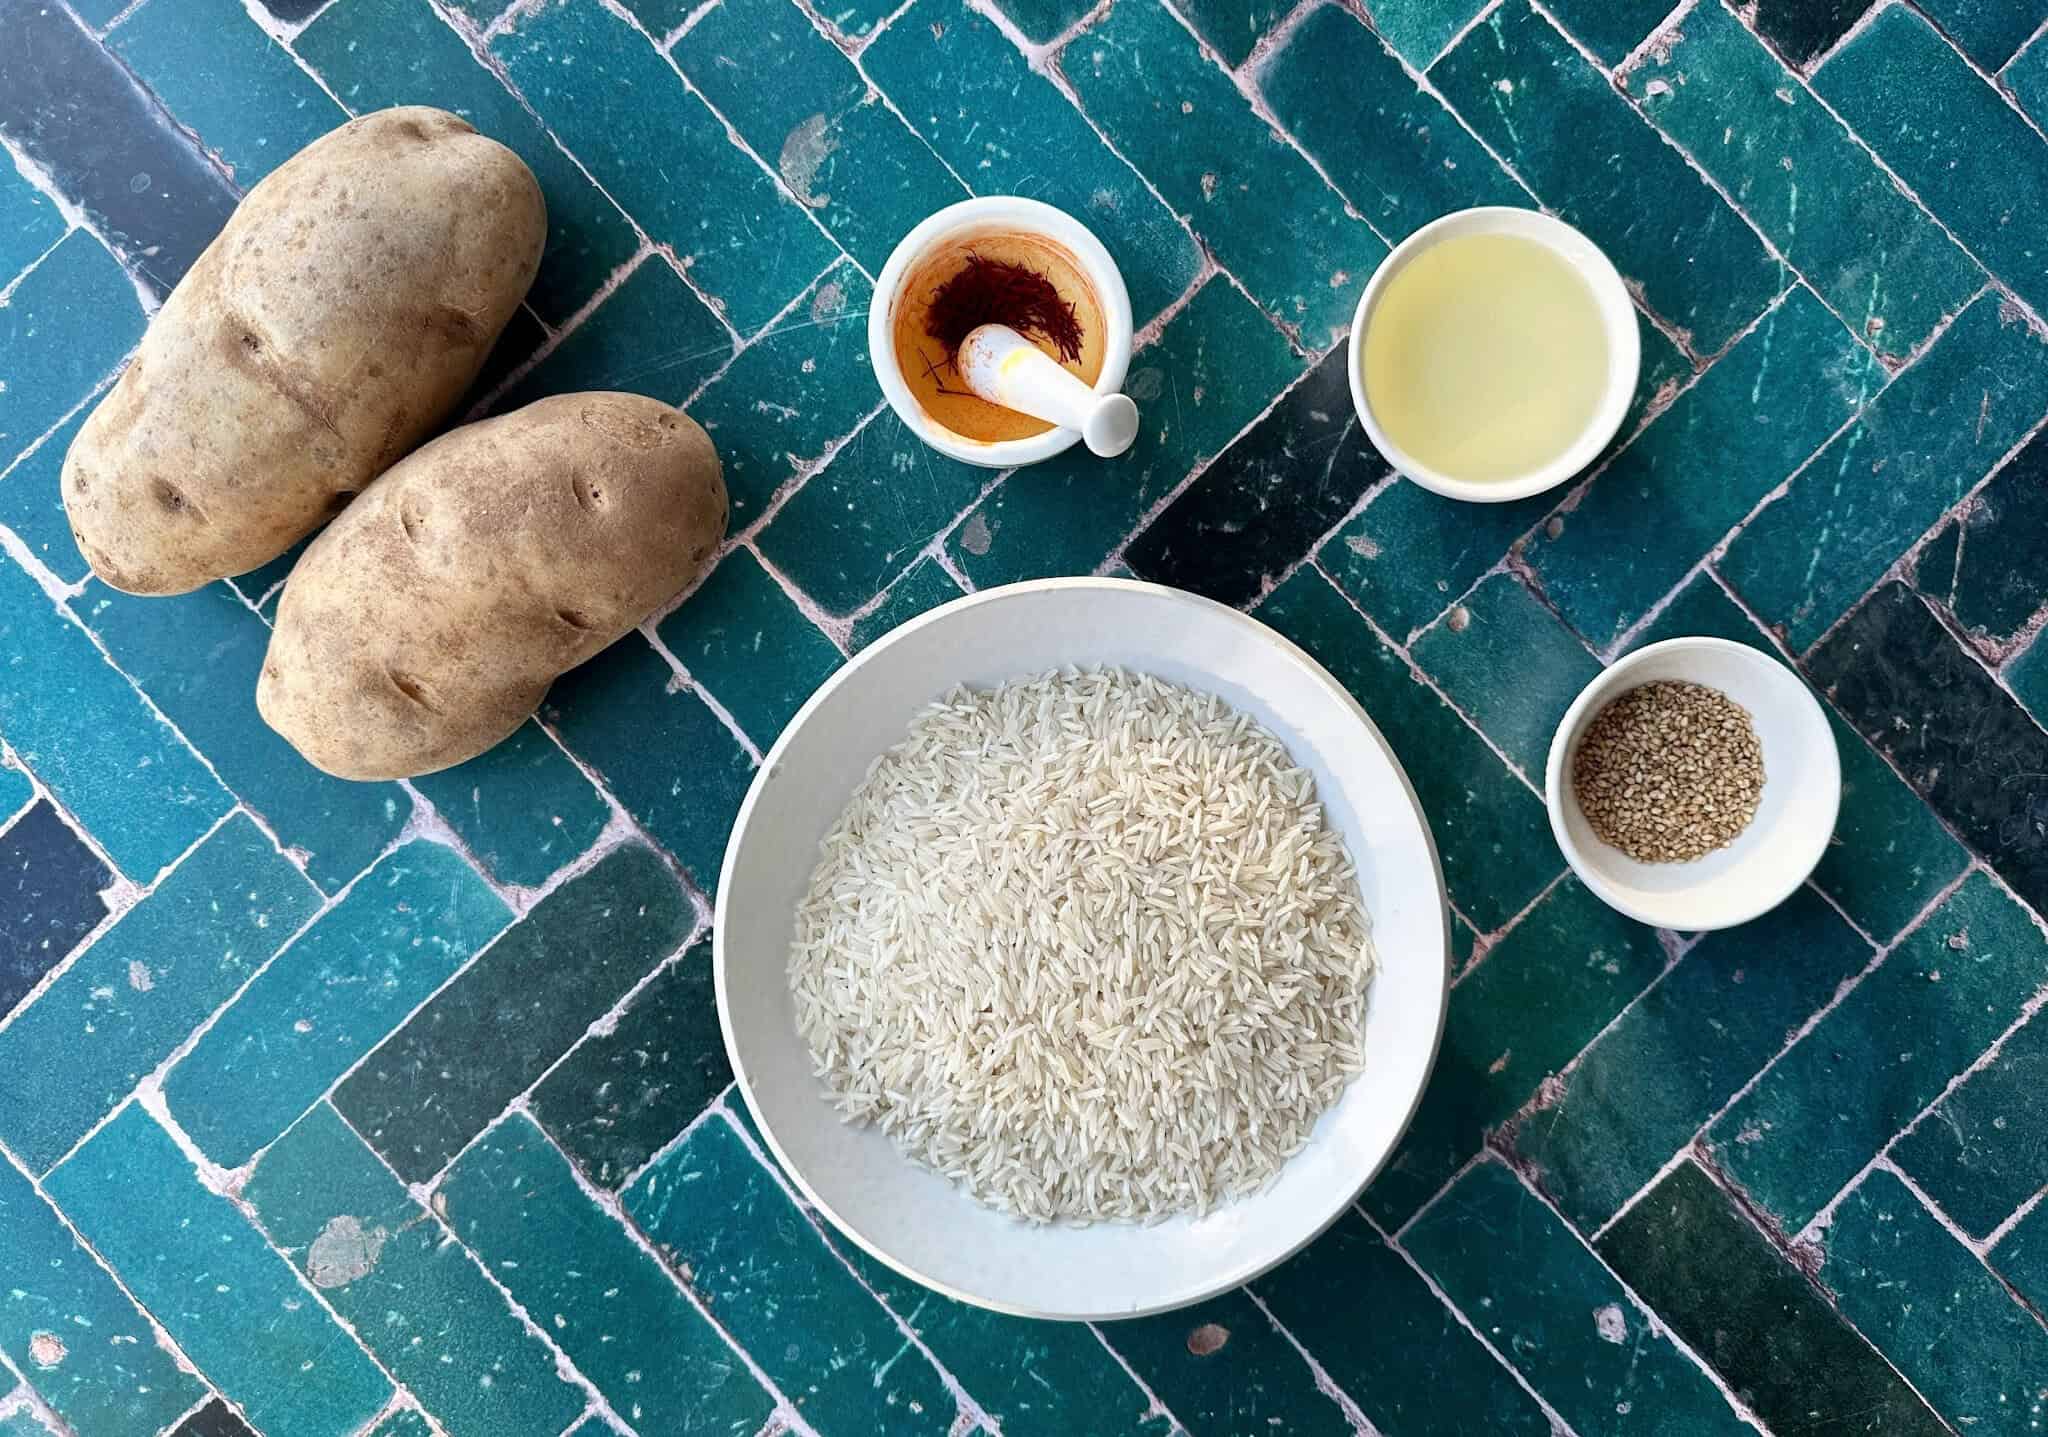 Ingredients to make potato tahdig are potatoes, rice, saffron oil and sesame seeds. 